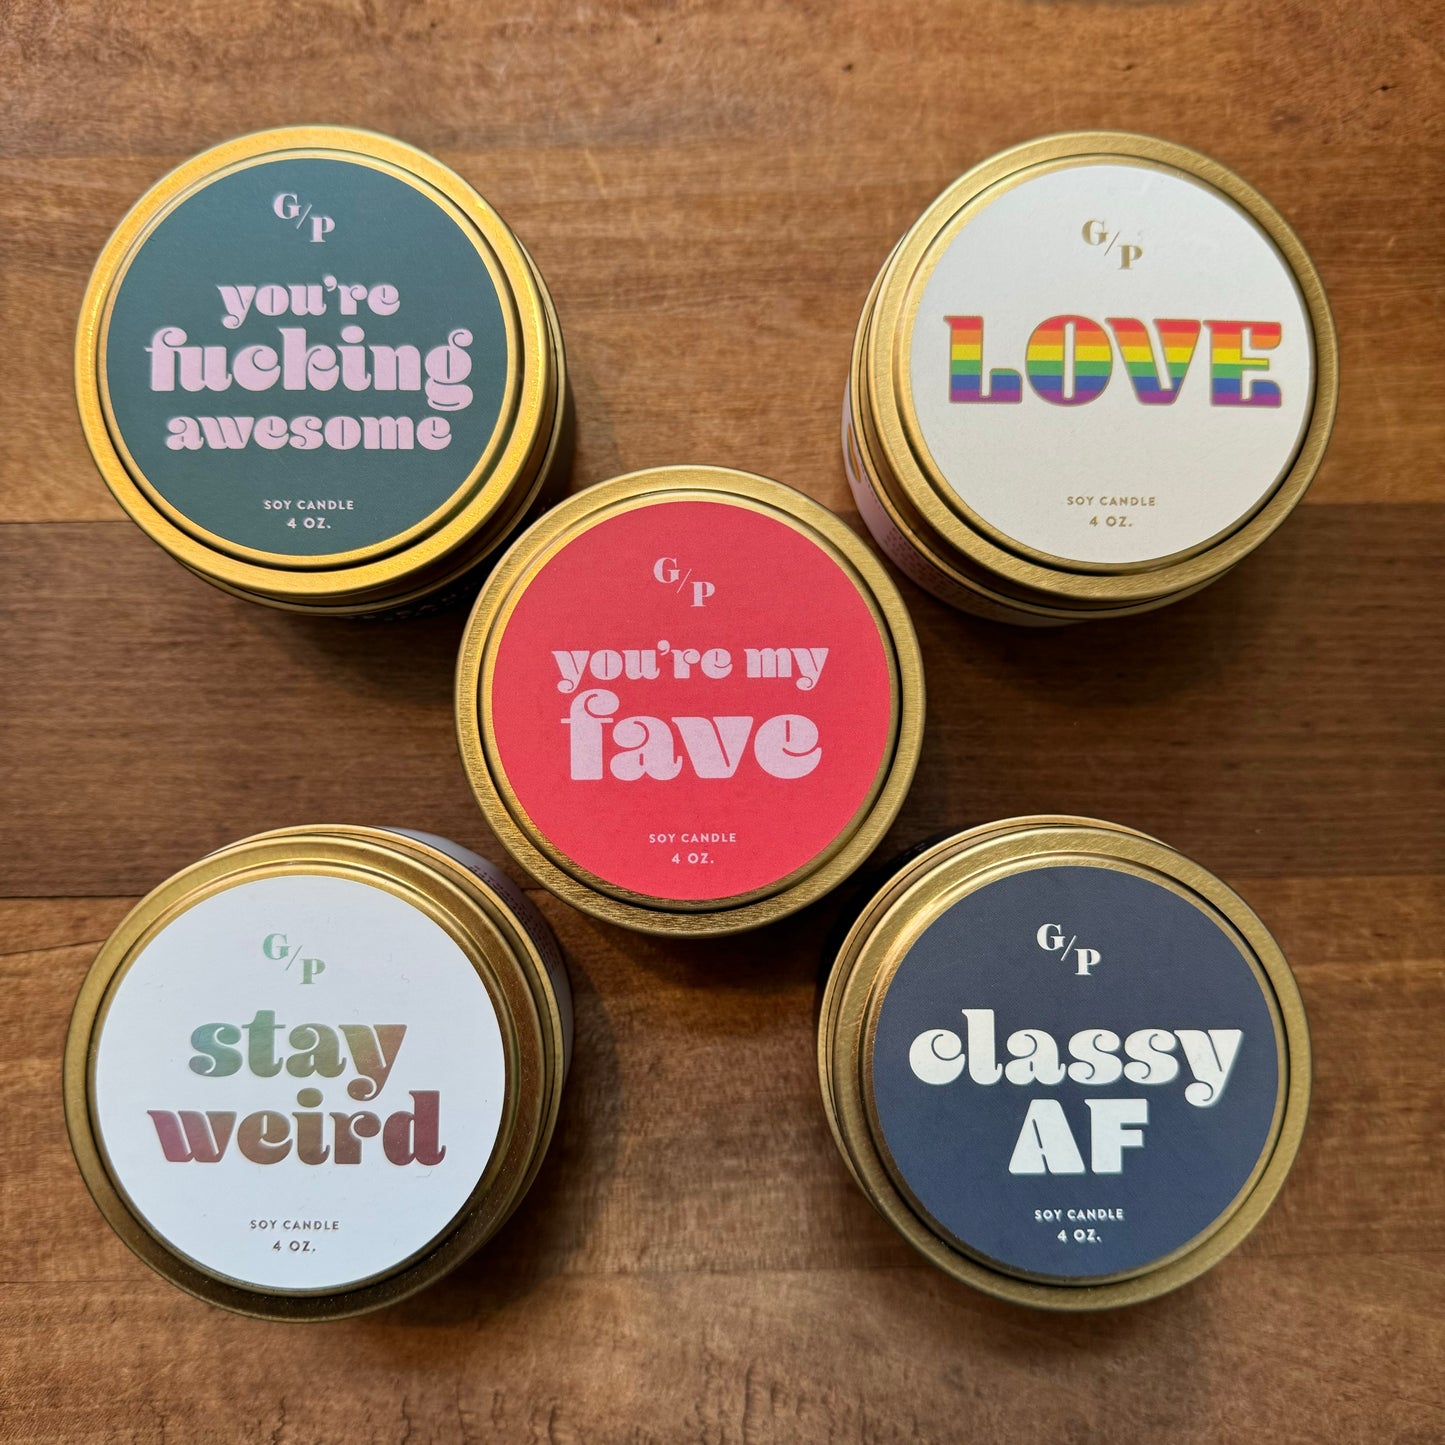 Six Tin Collection Soy Candles II from GP Candle Co with playful phrases on the labels arranged on a wooden surface.